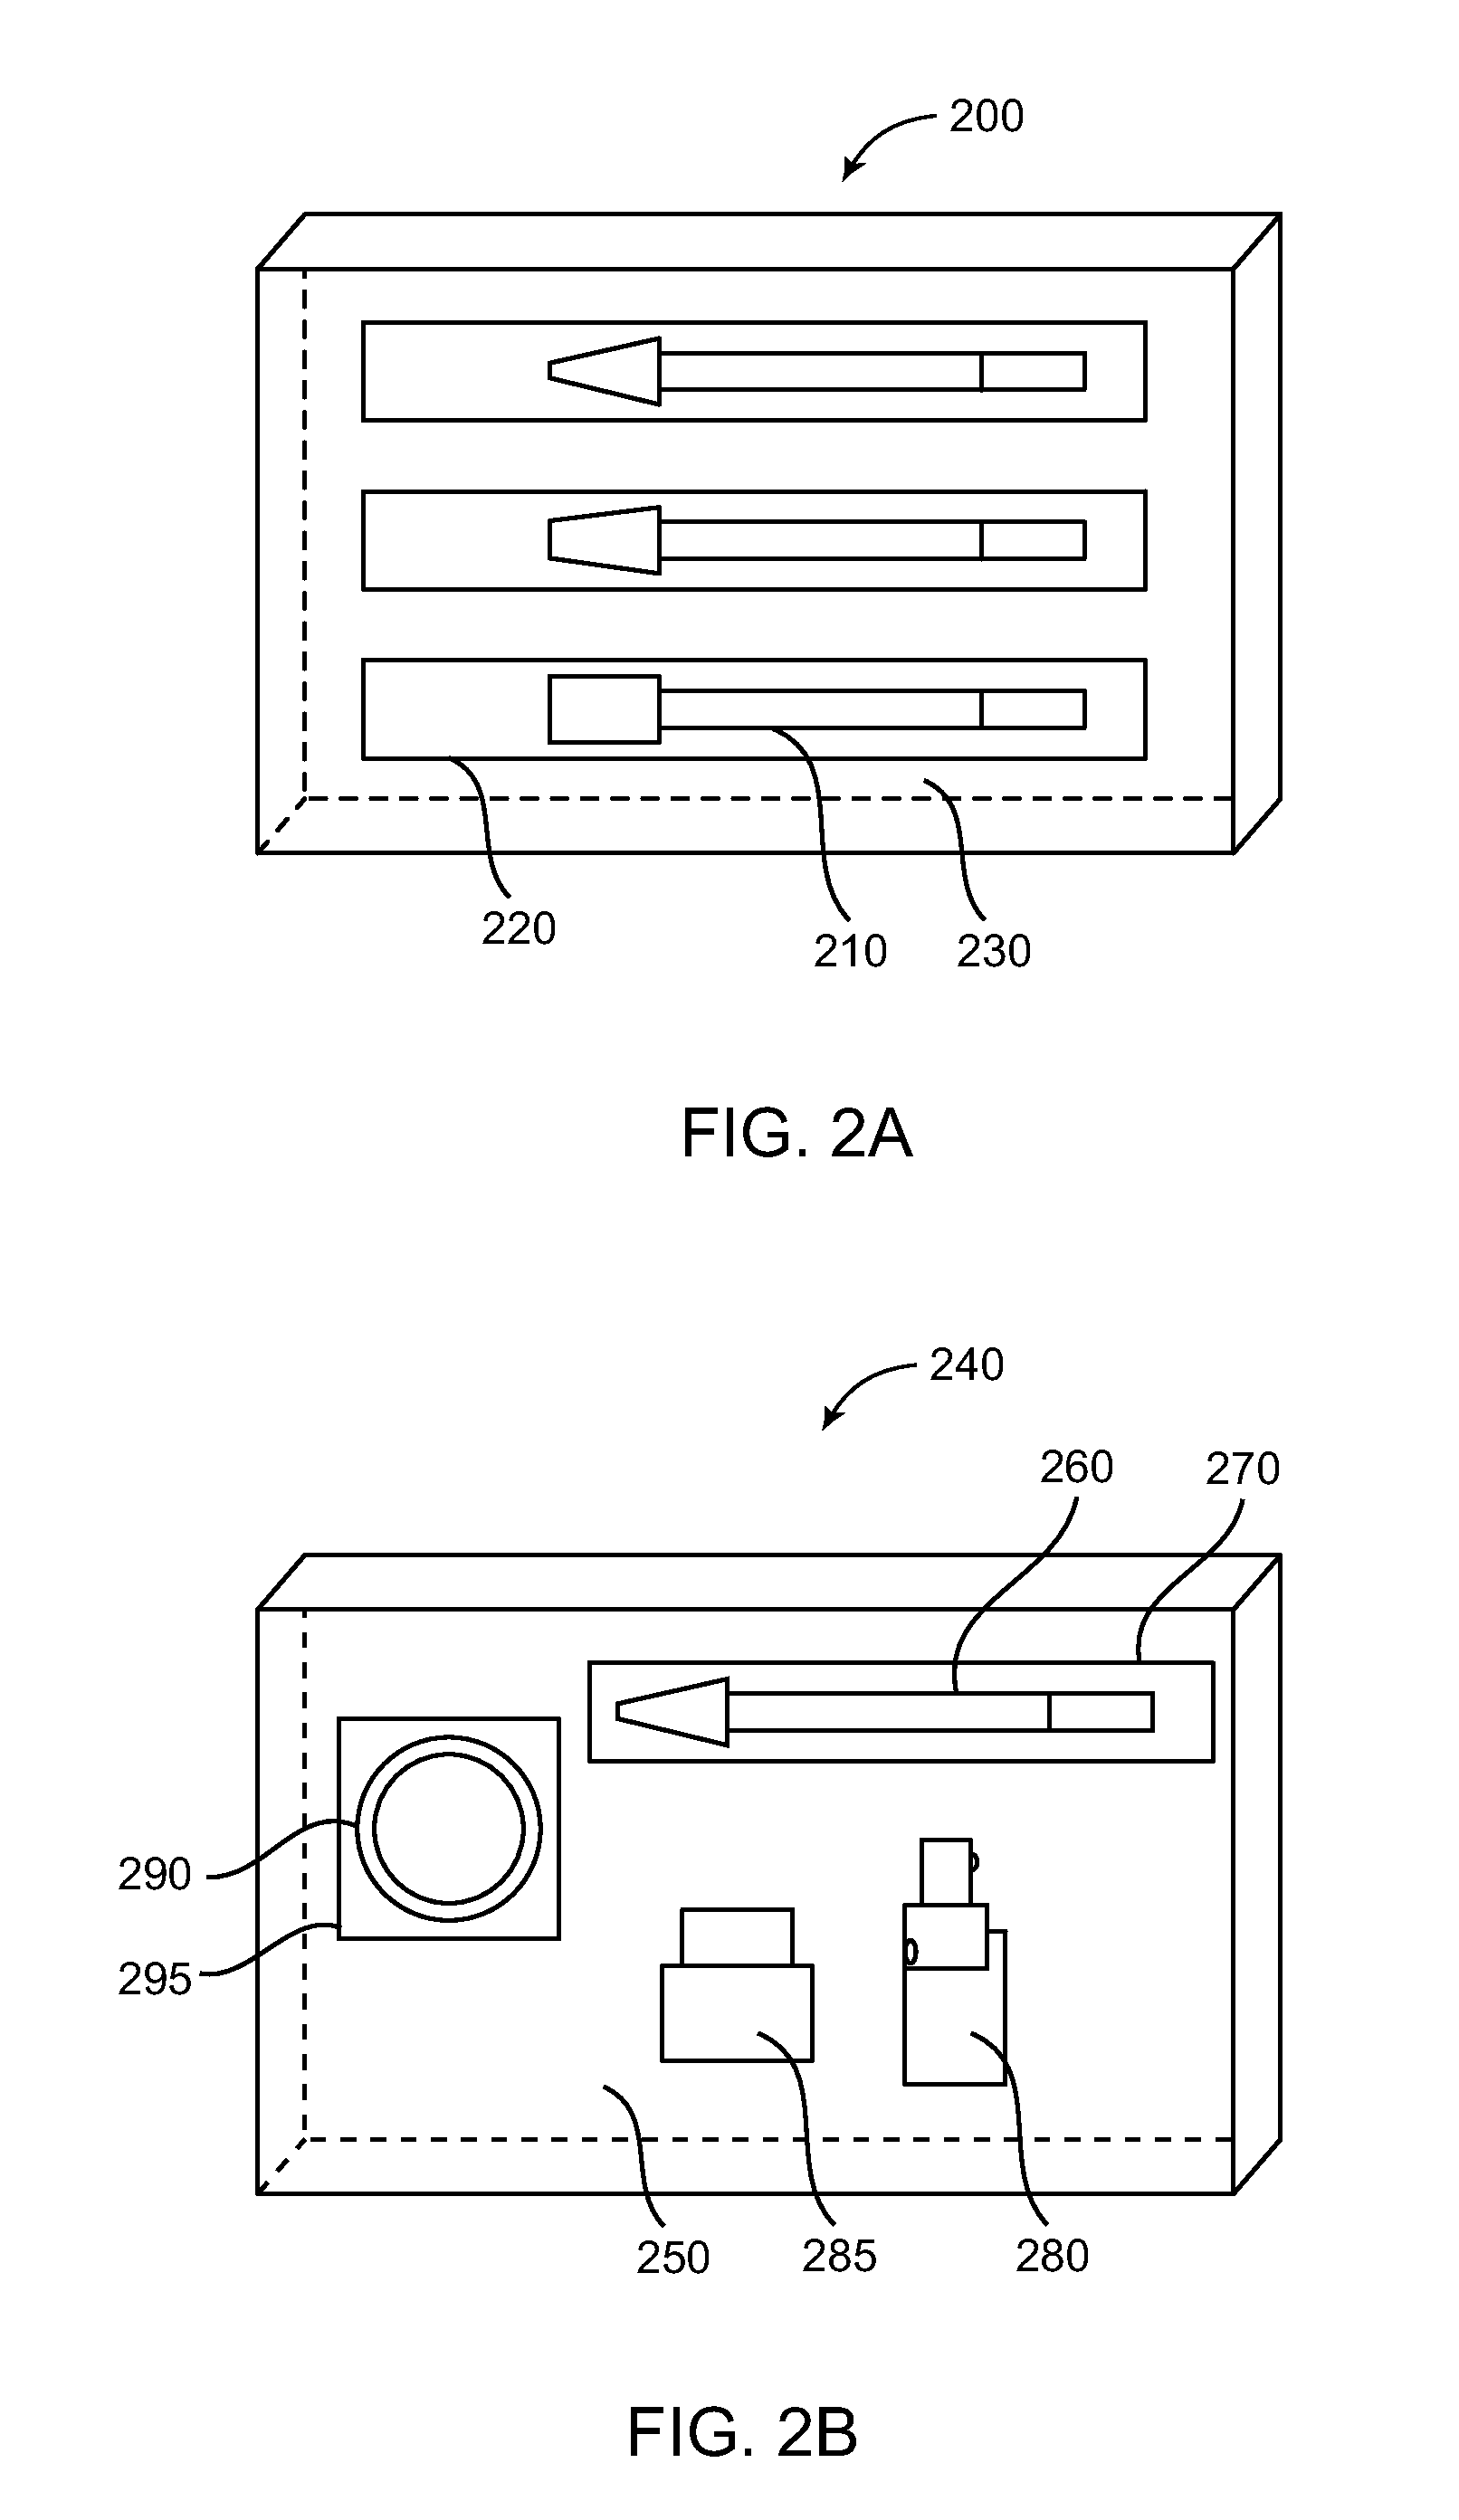 Systems, Methods, and Kits for Cleansing an Ocular Region